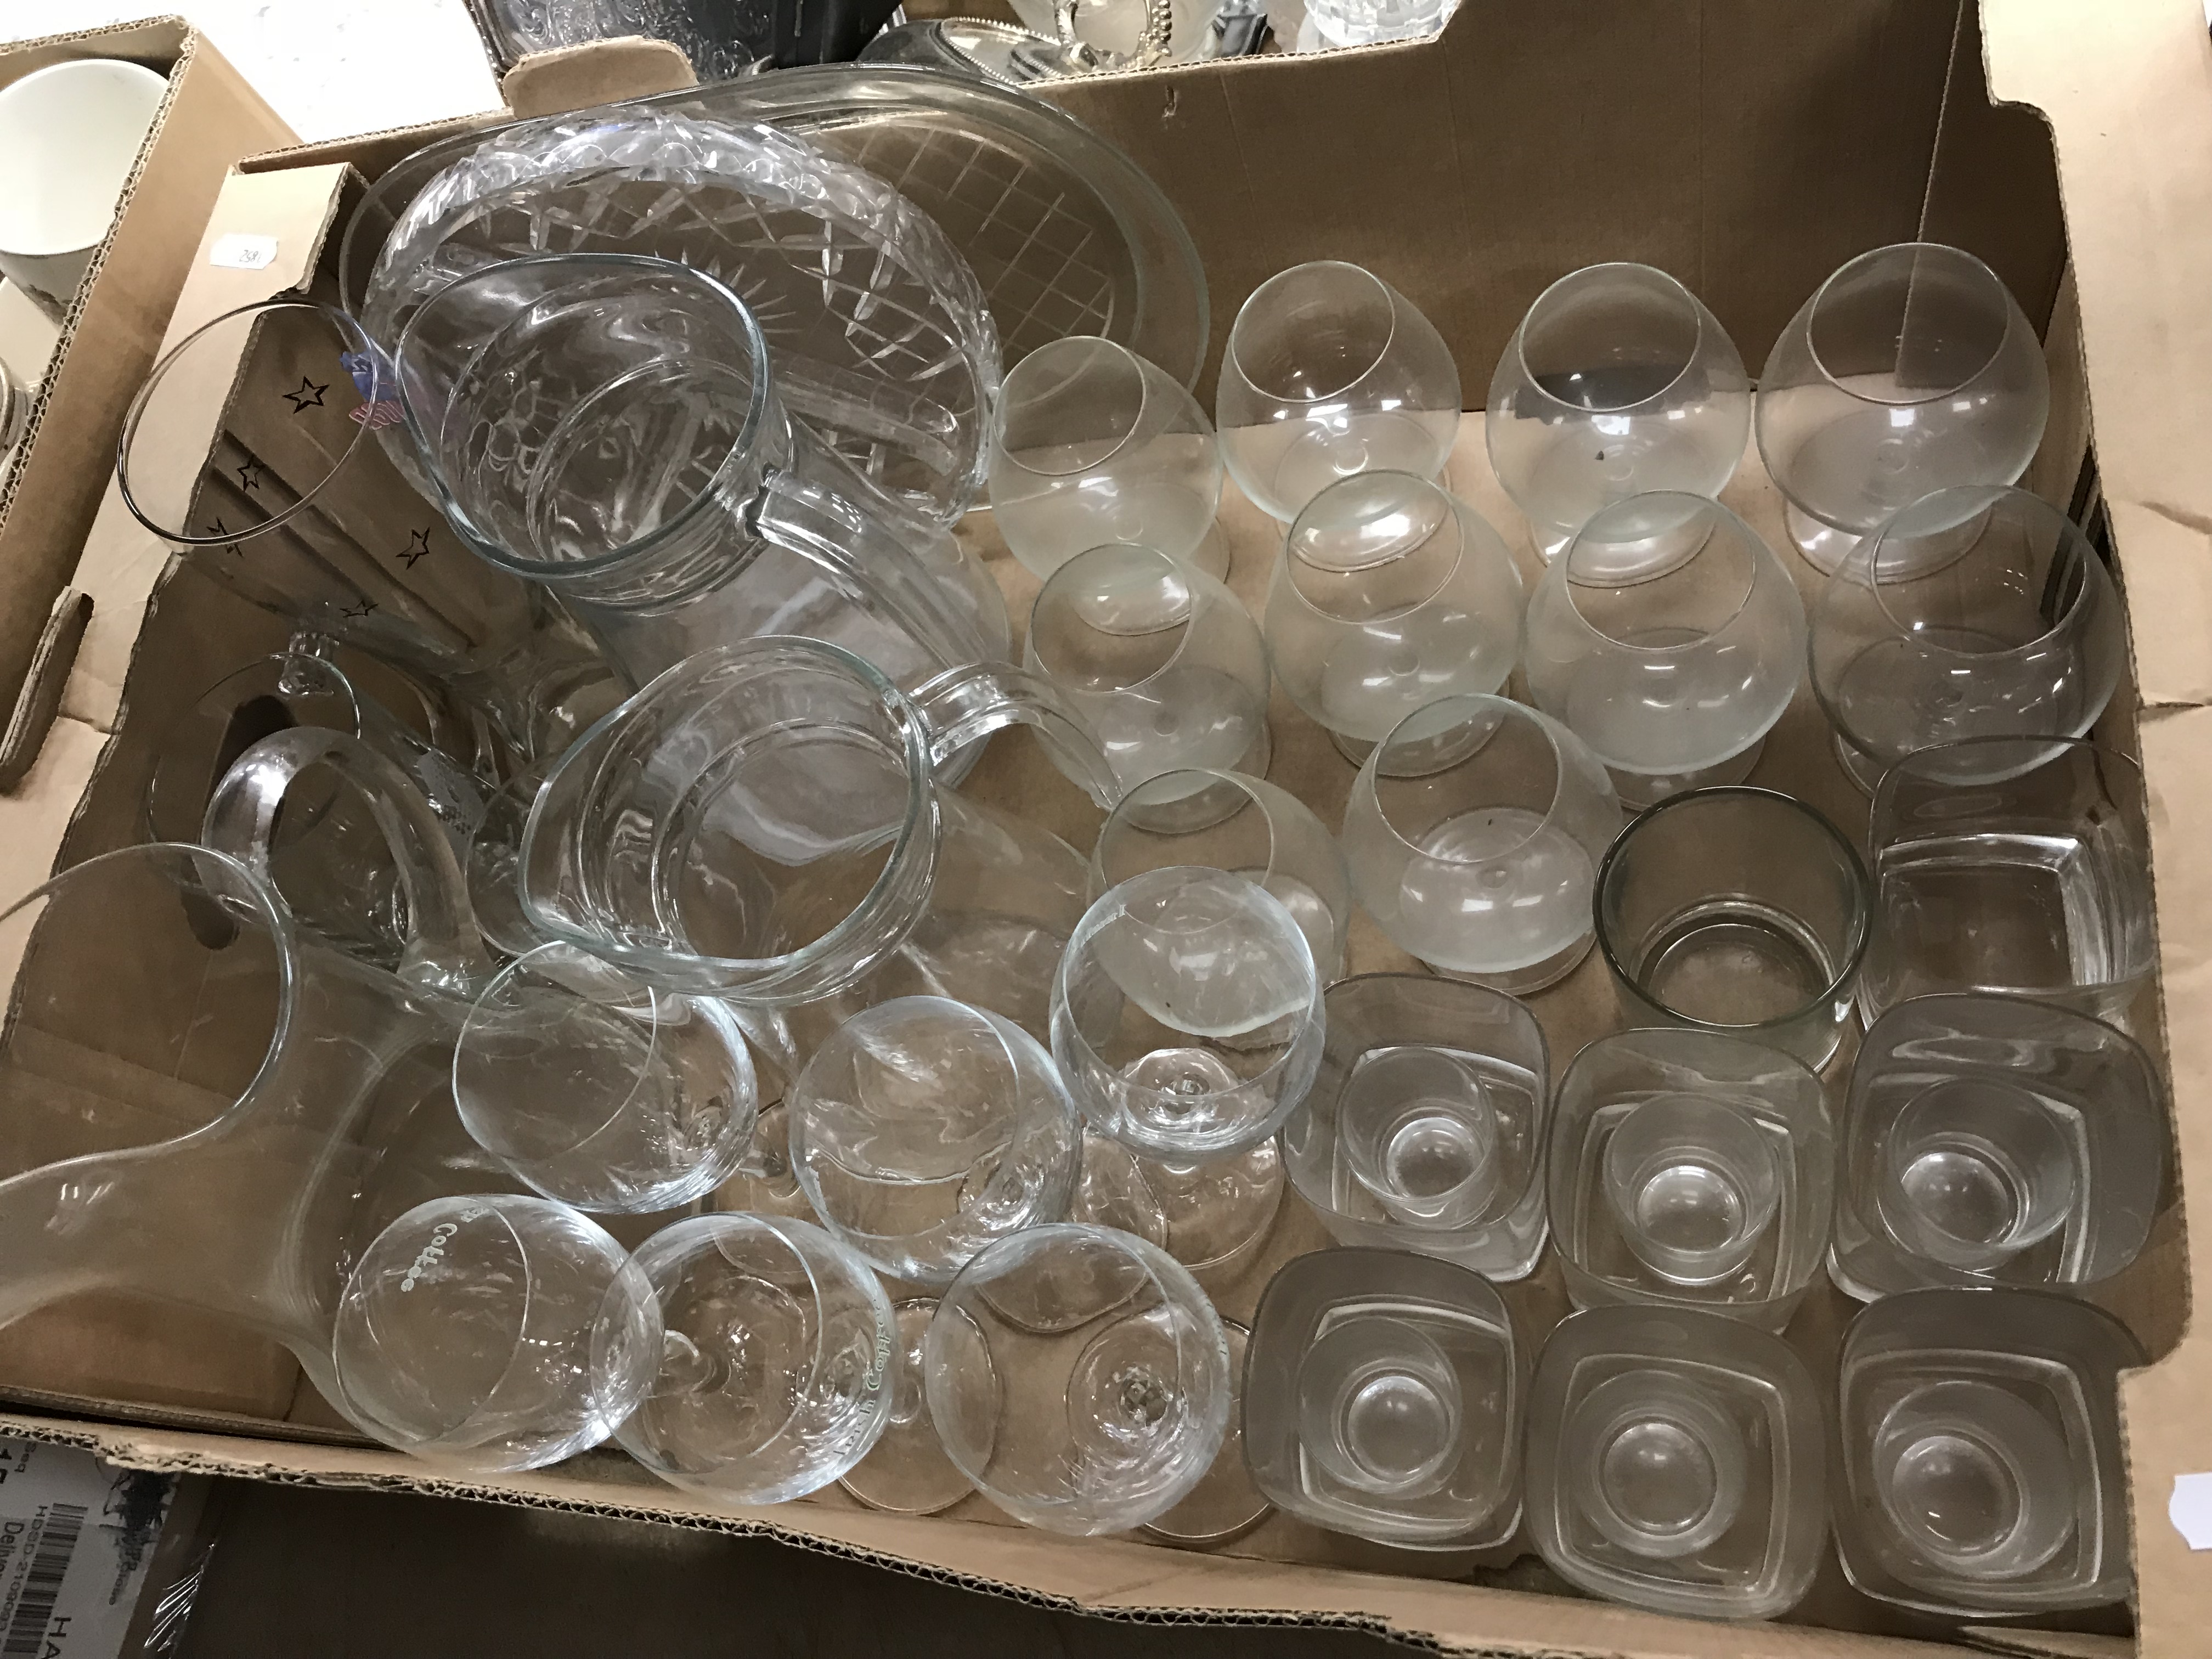 Two boxes of glassware to include wine glasses, lemonade jugs, - Image 3 of 3